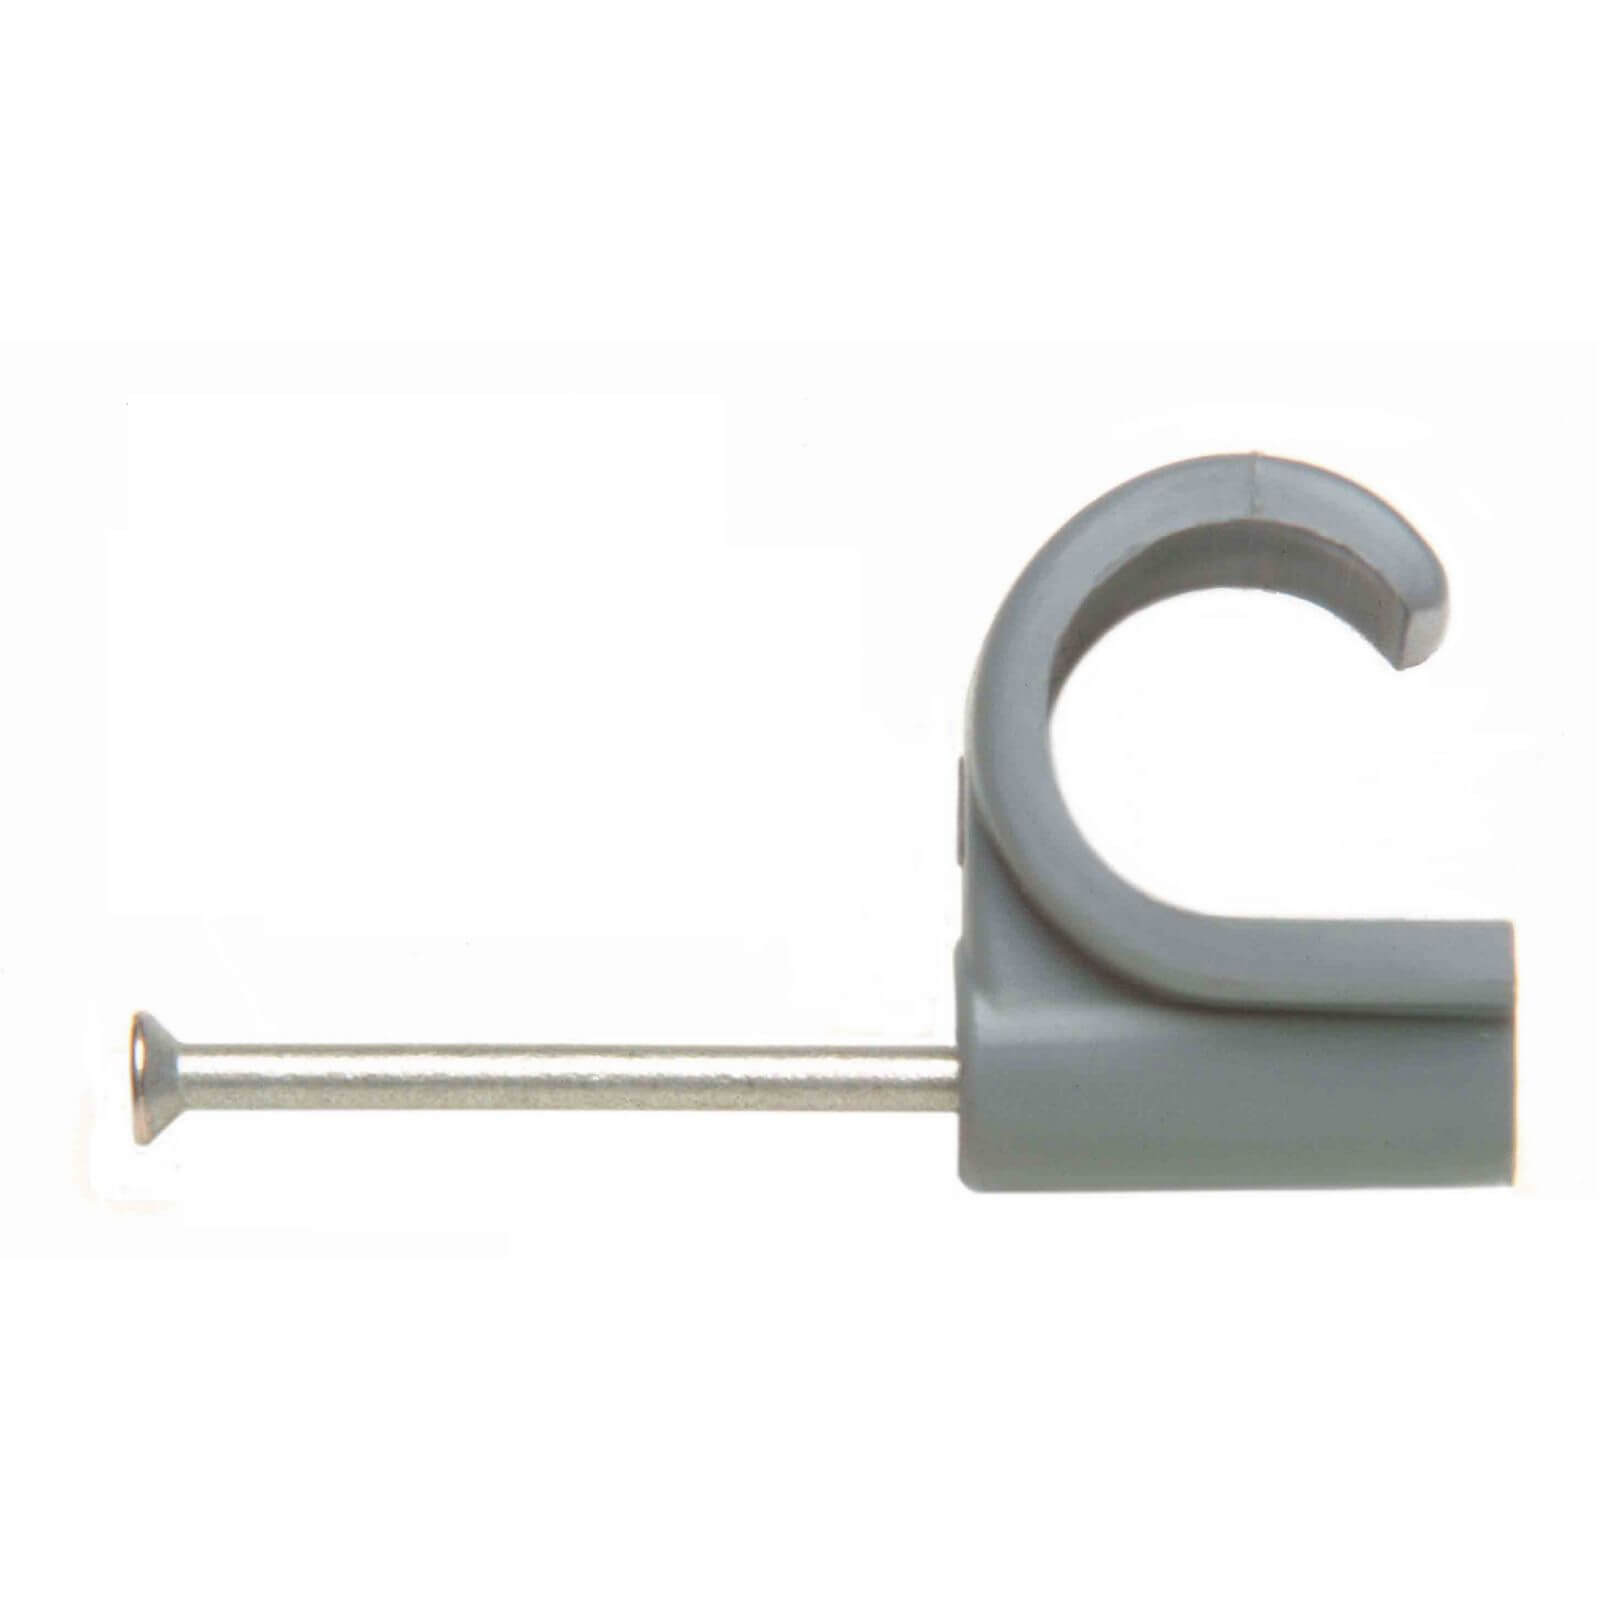 Photo of Oracstar Nail In Pipe Clips - 15mm - Grey - 20 Pack